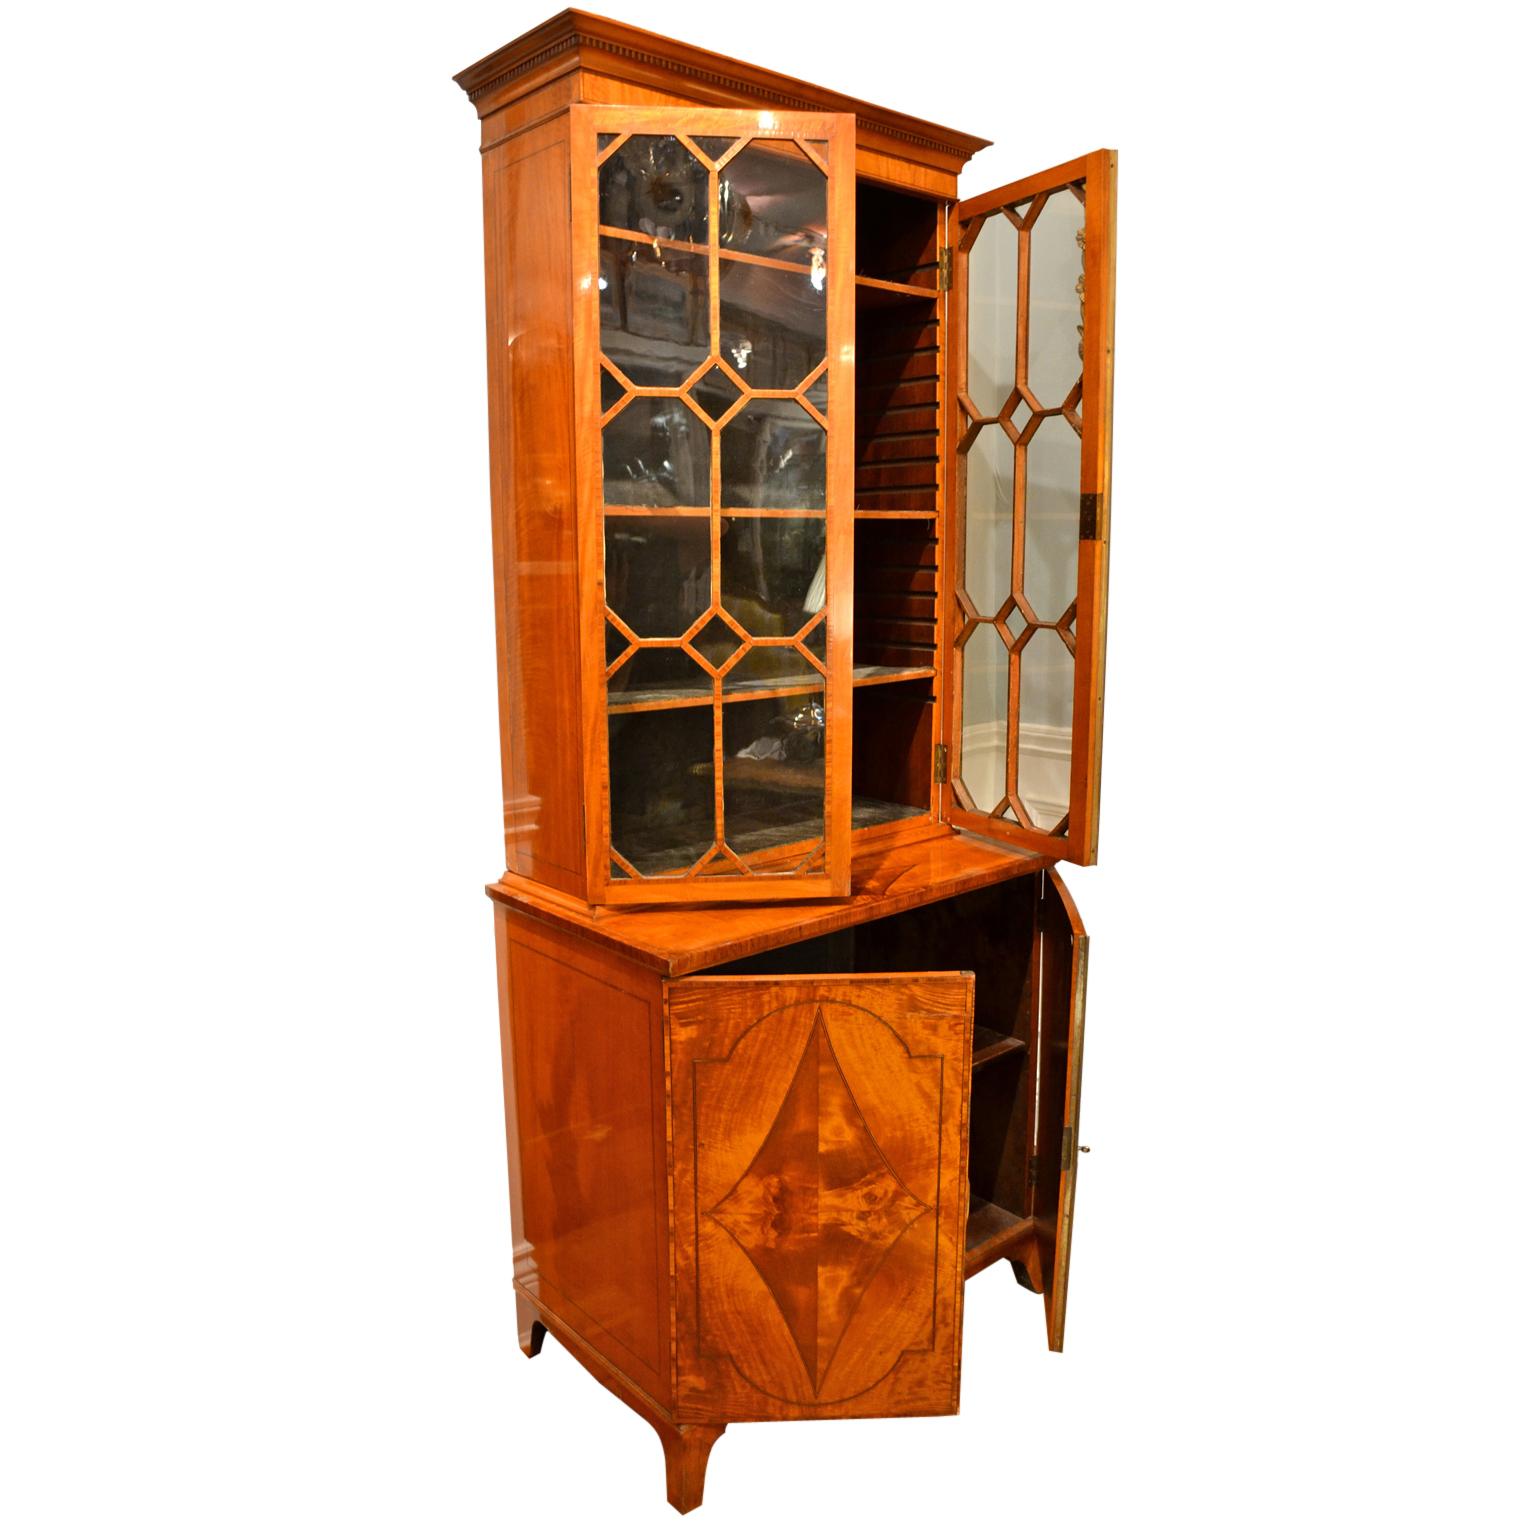 A classic period Sheraton English satinwood and tulipwood China display case or bookcase the upper section with dentil cornice above a pair of astragal glazed doors, enclosing three adjustable shelves, the base consisting of a shelved cupboard